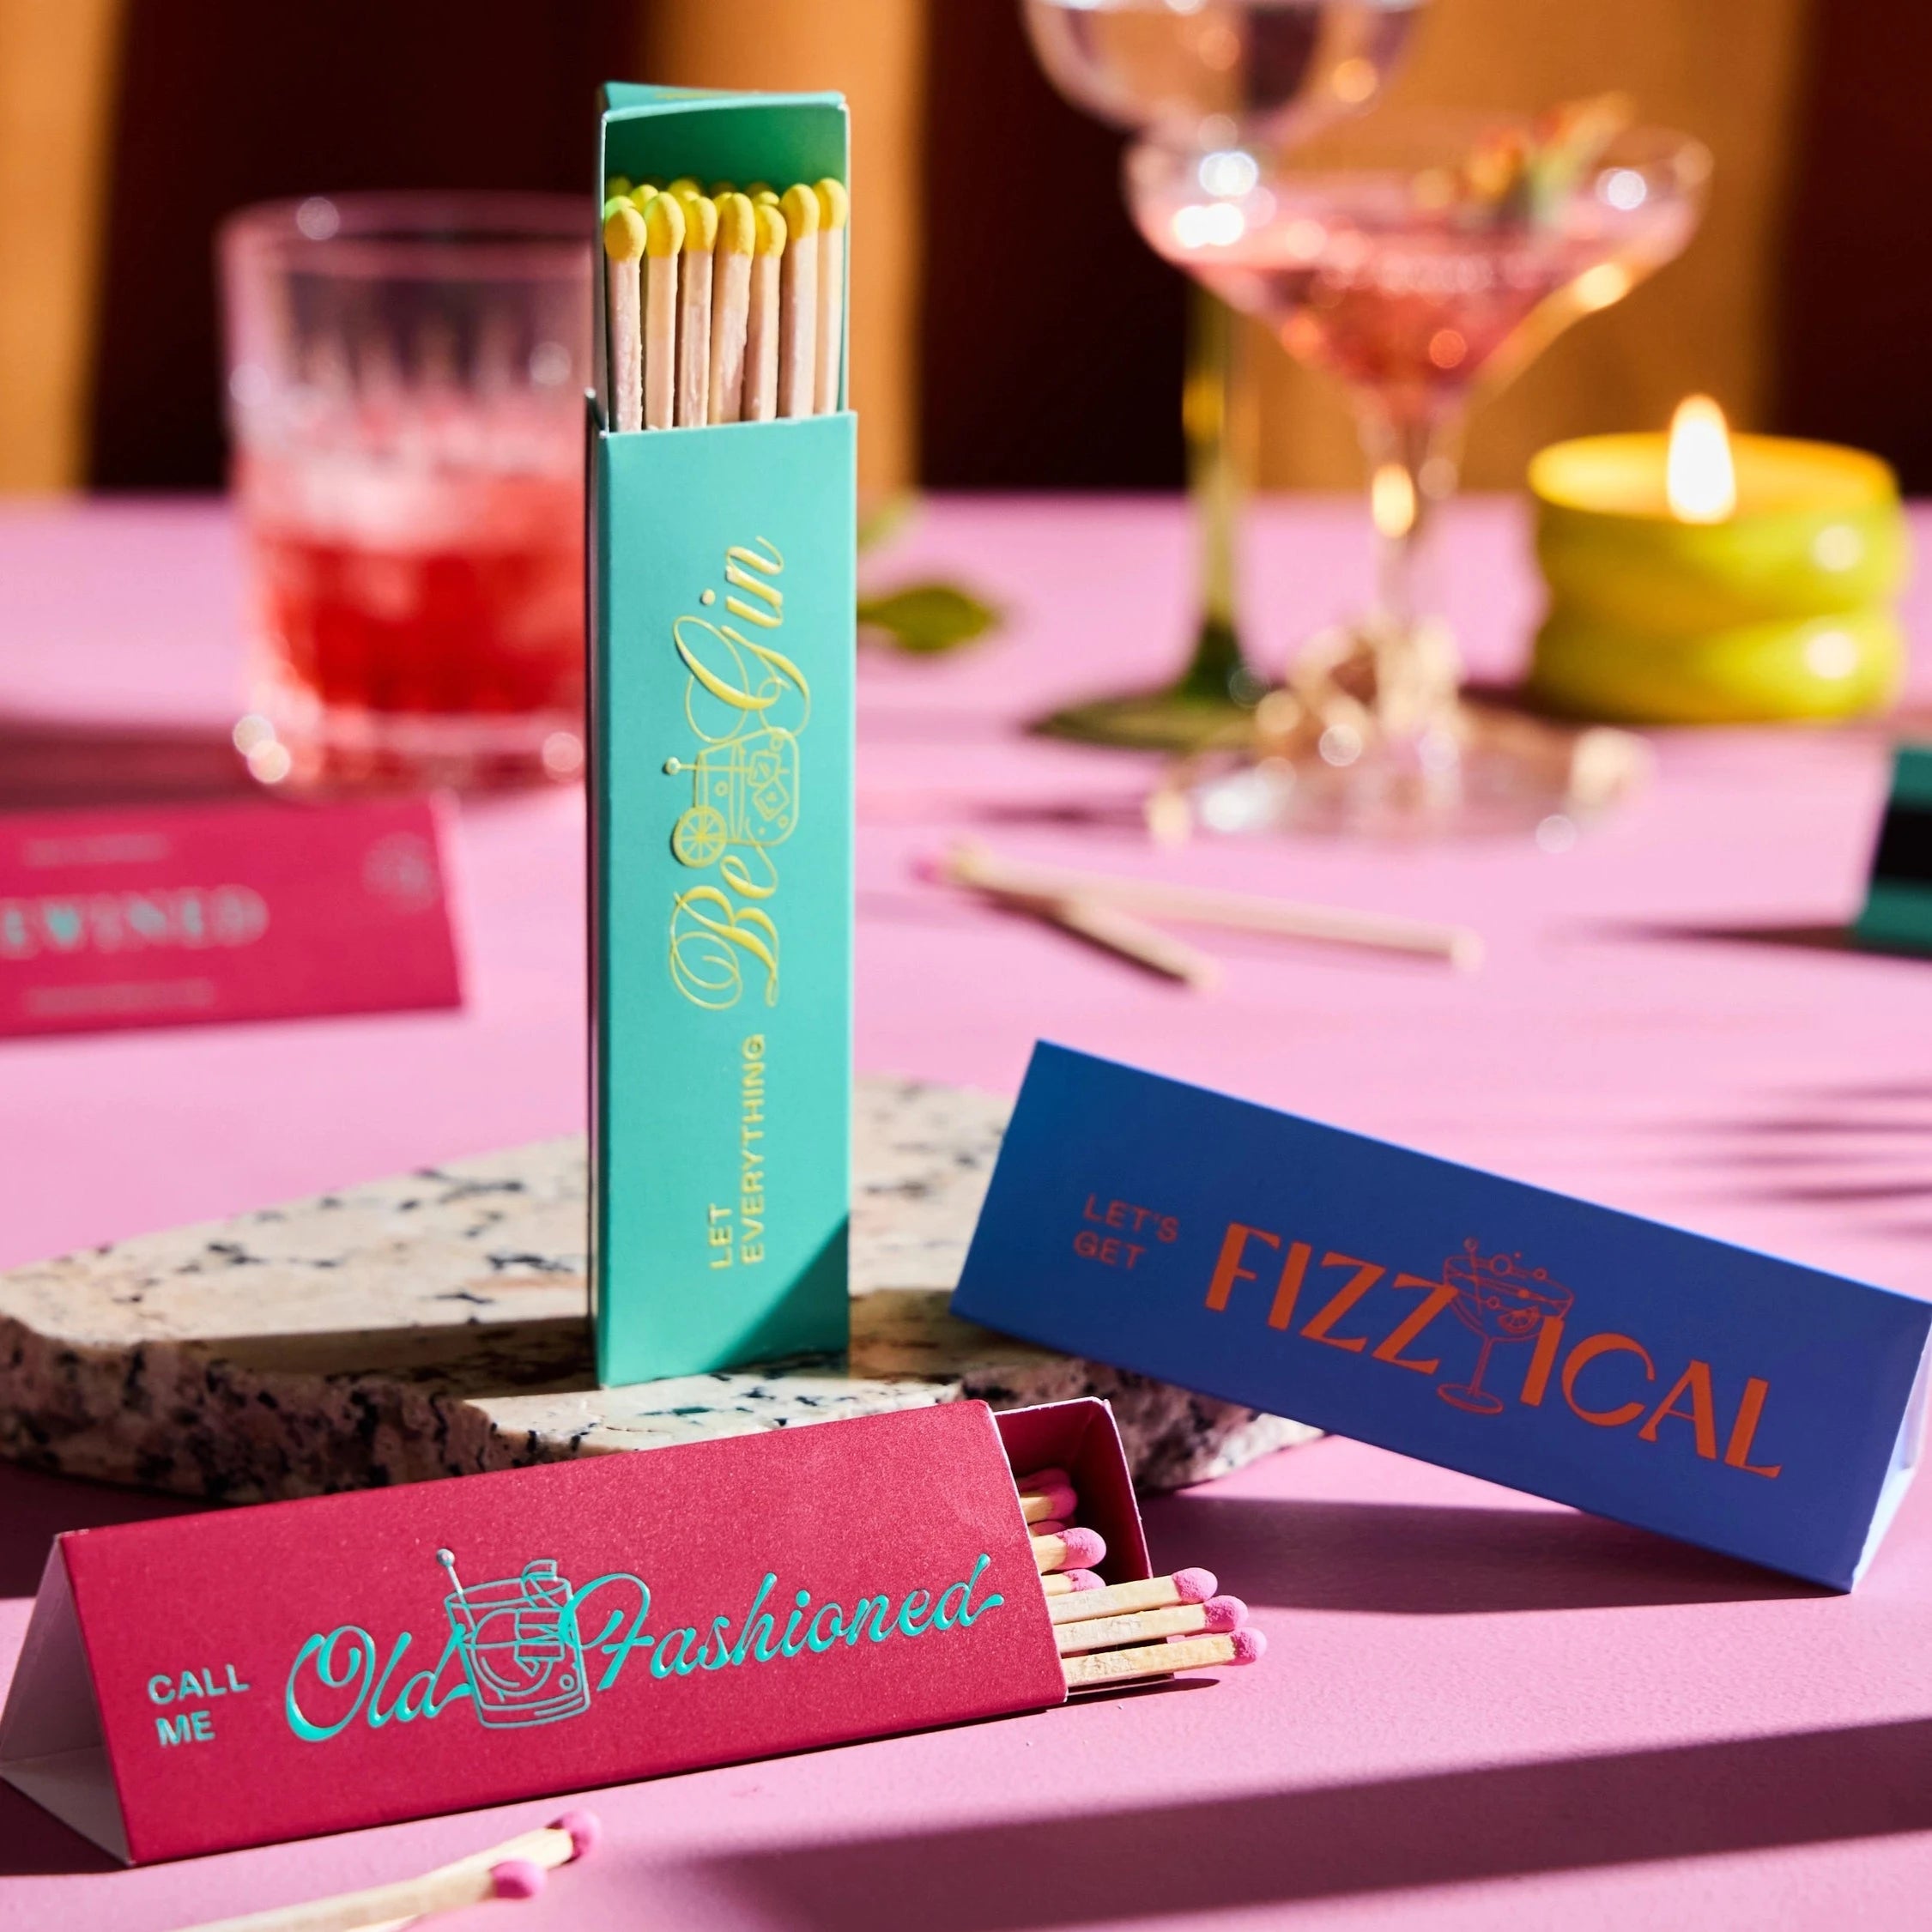 3 Matchboxes: Turquoise with "Be Gin" written on it in Yellow, Blue with "Fizzical" written on it in Red, and Magenta with "Old Fashioned" written on it in Turquoise